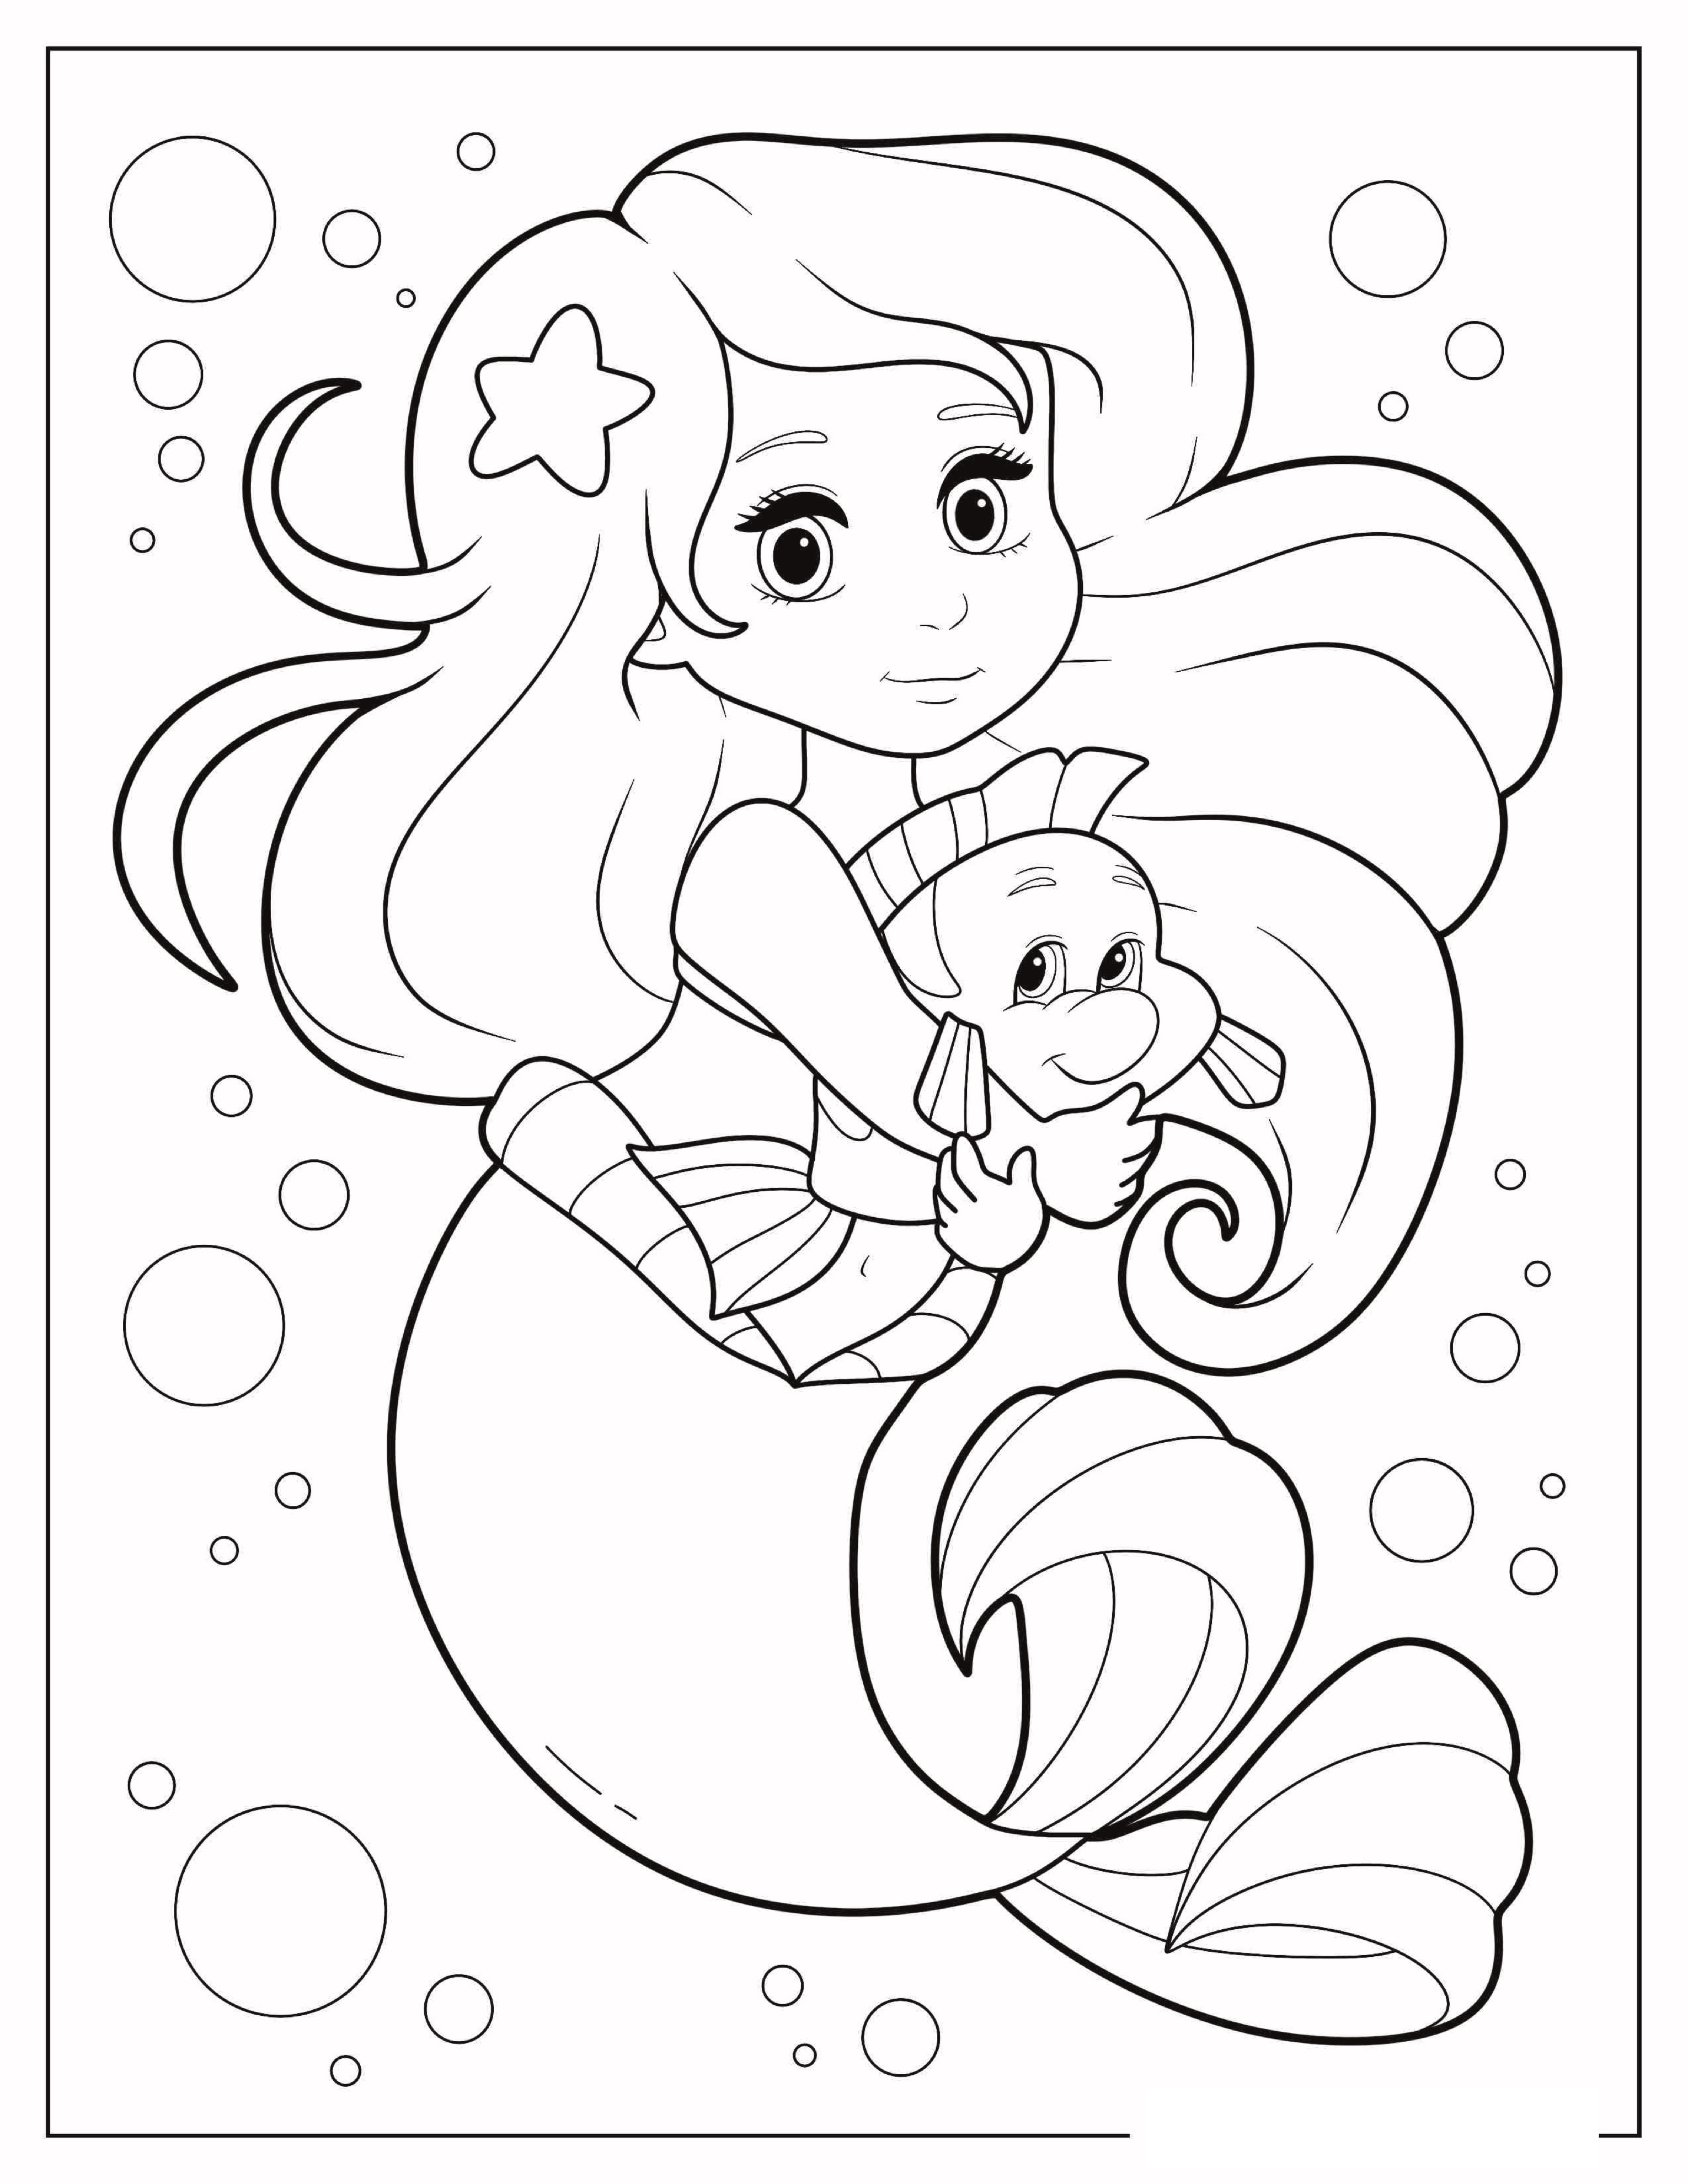 Young-Ariel-Holding-Flounders-Coloring-In.jpg